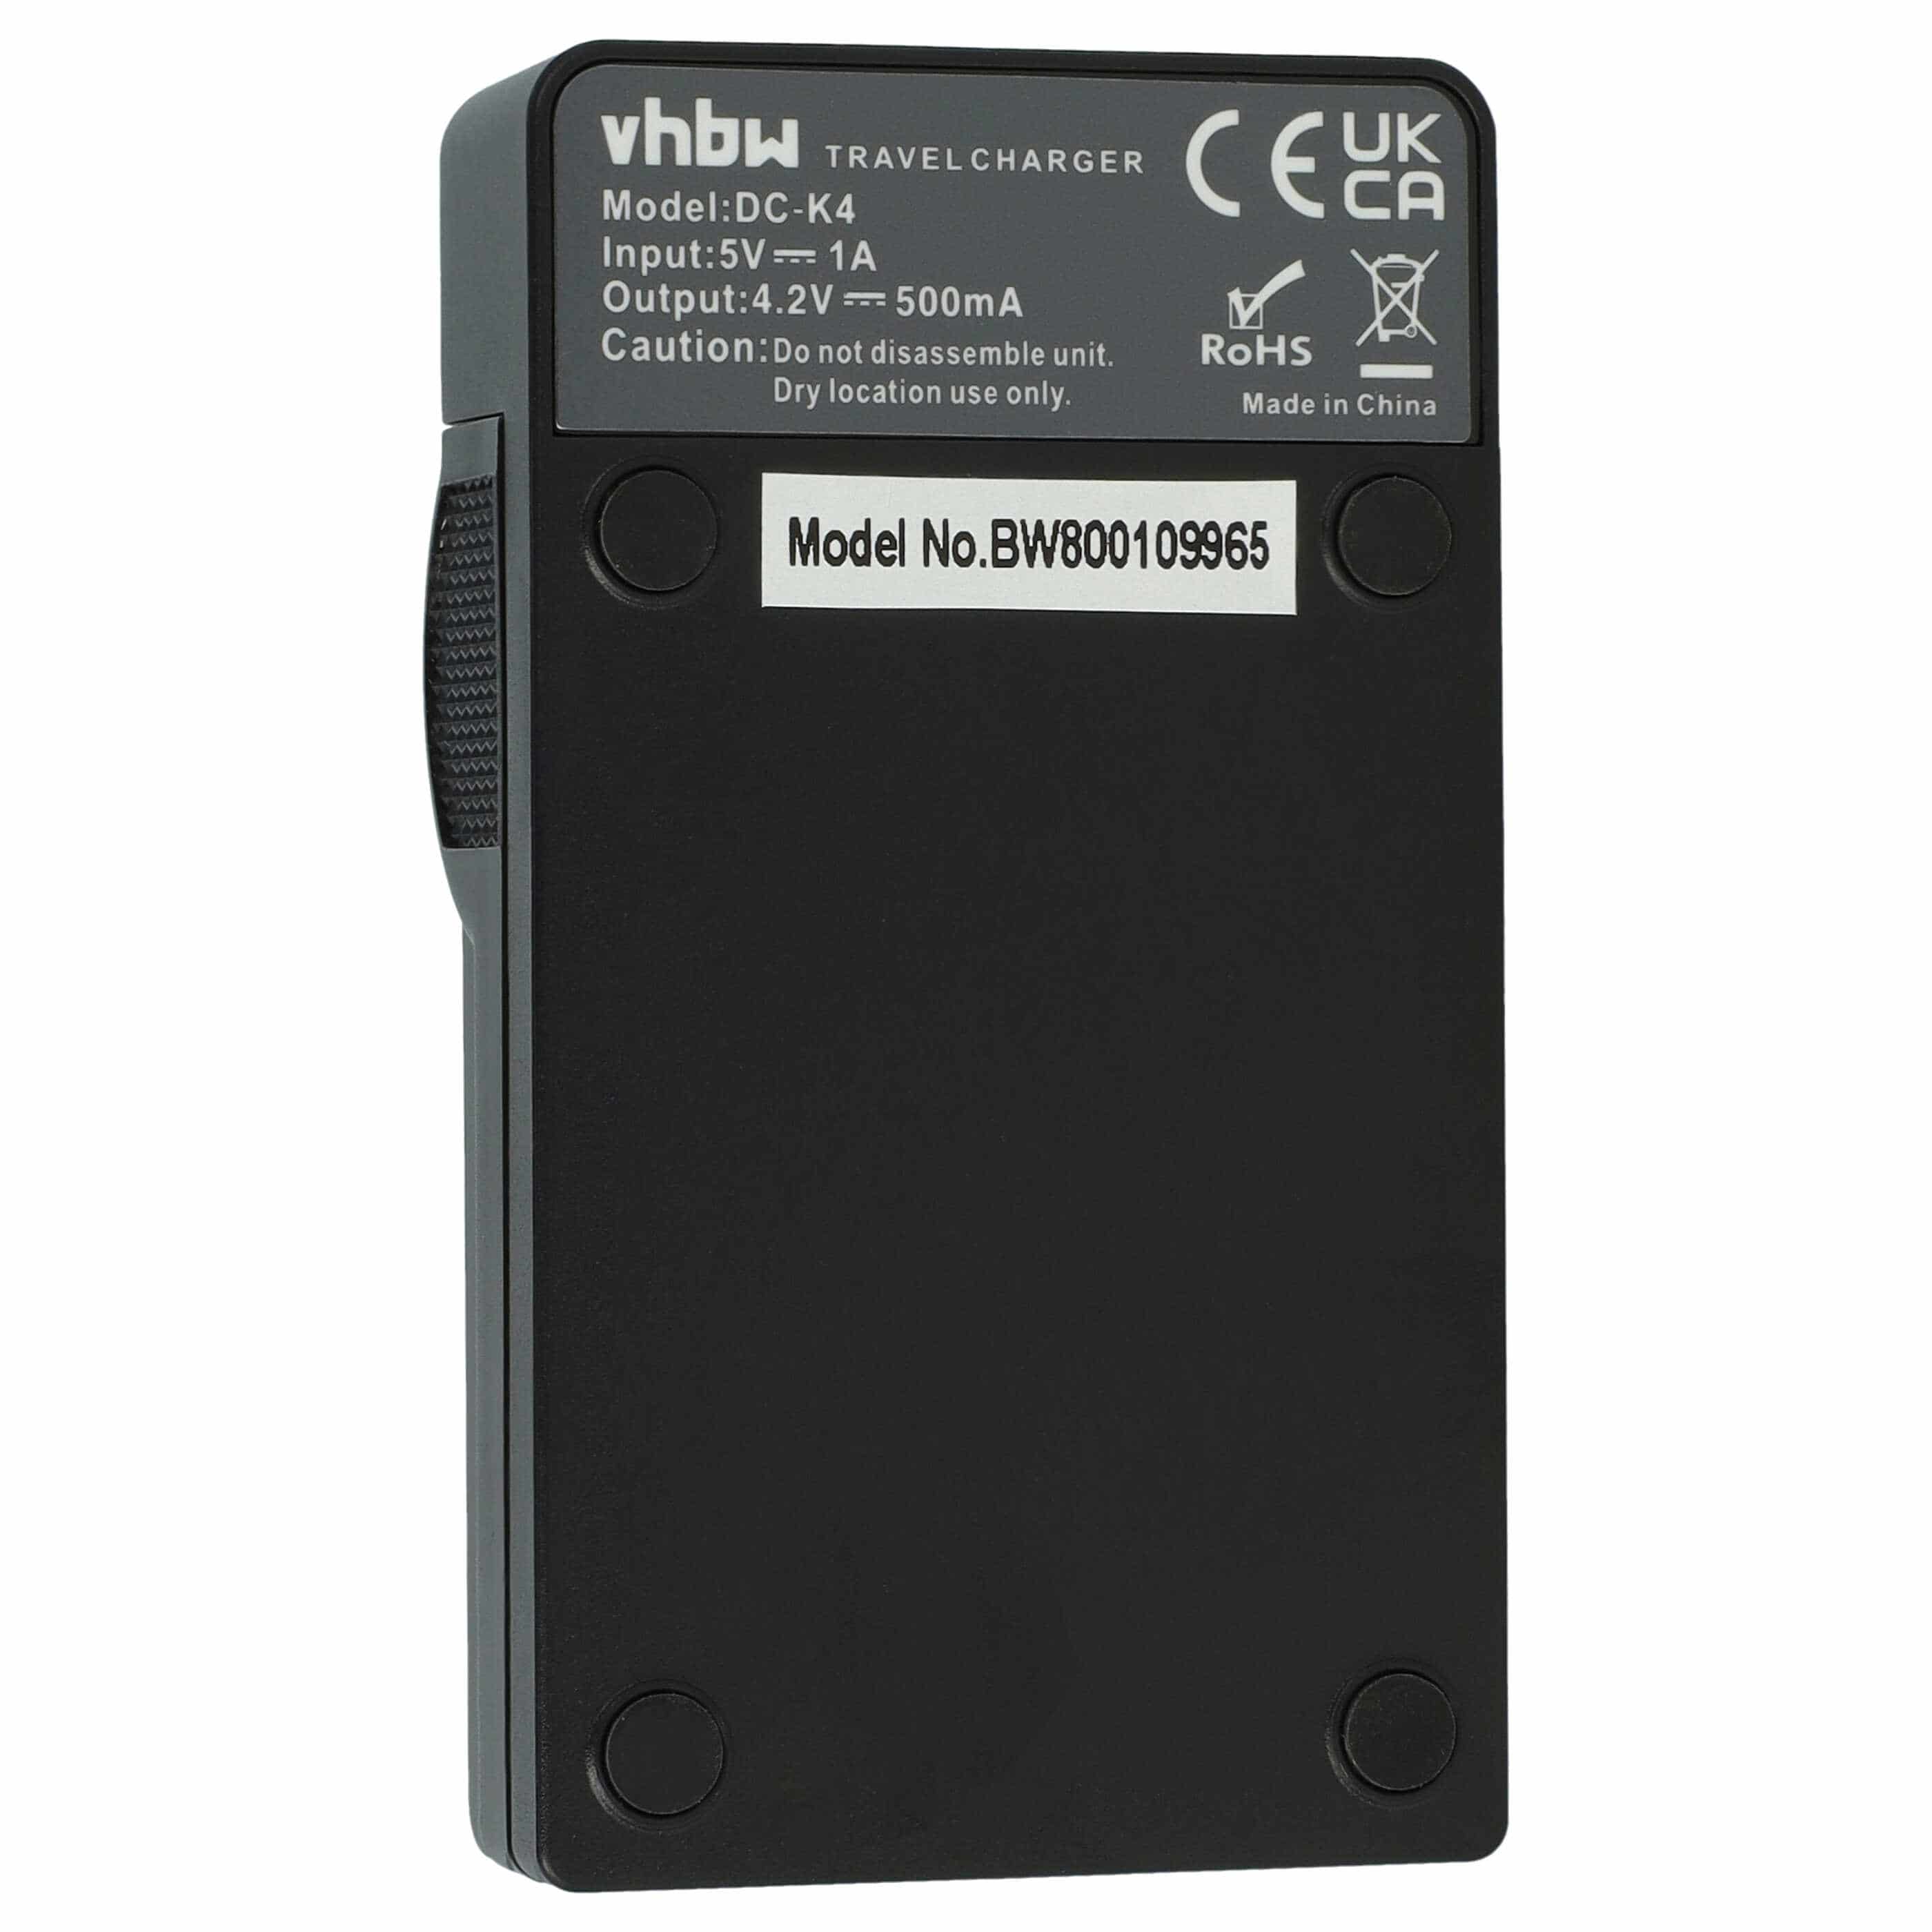 Battery Charger suitable for Sony NP-BX1 Camera etc. - 0.5 A, 4.2 V